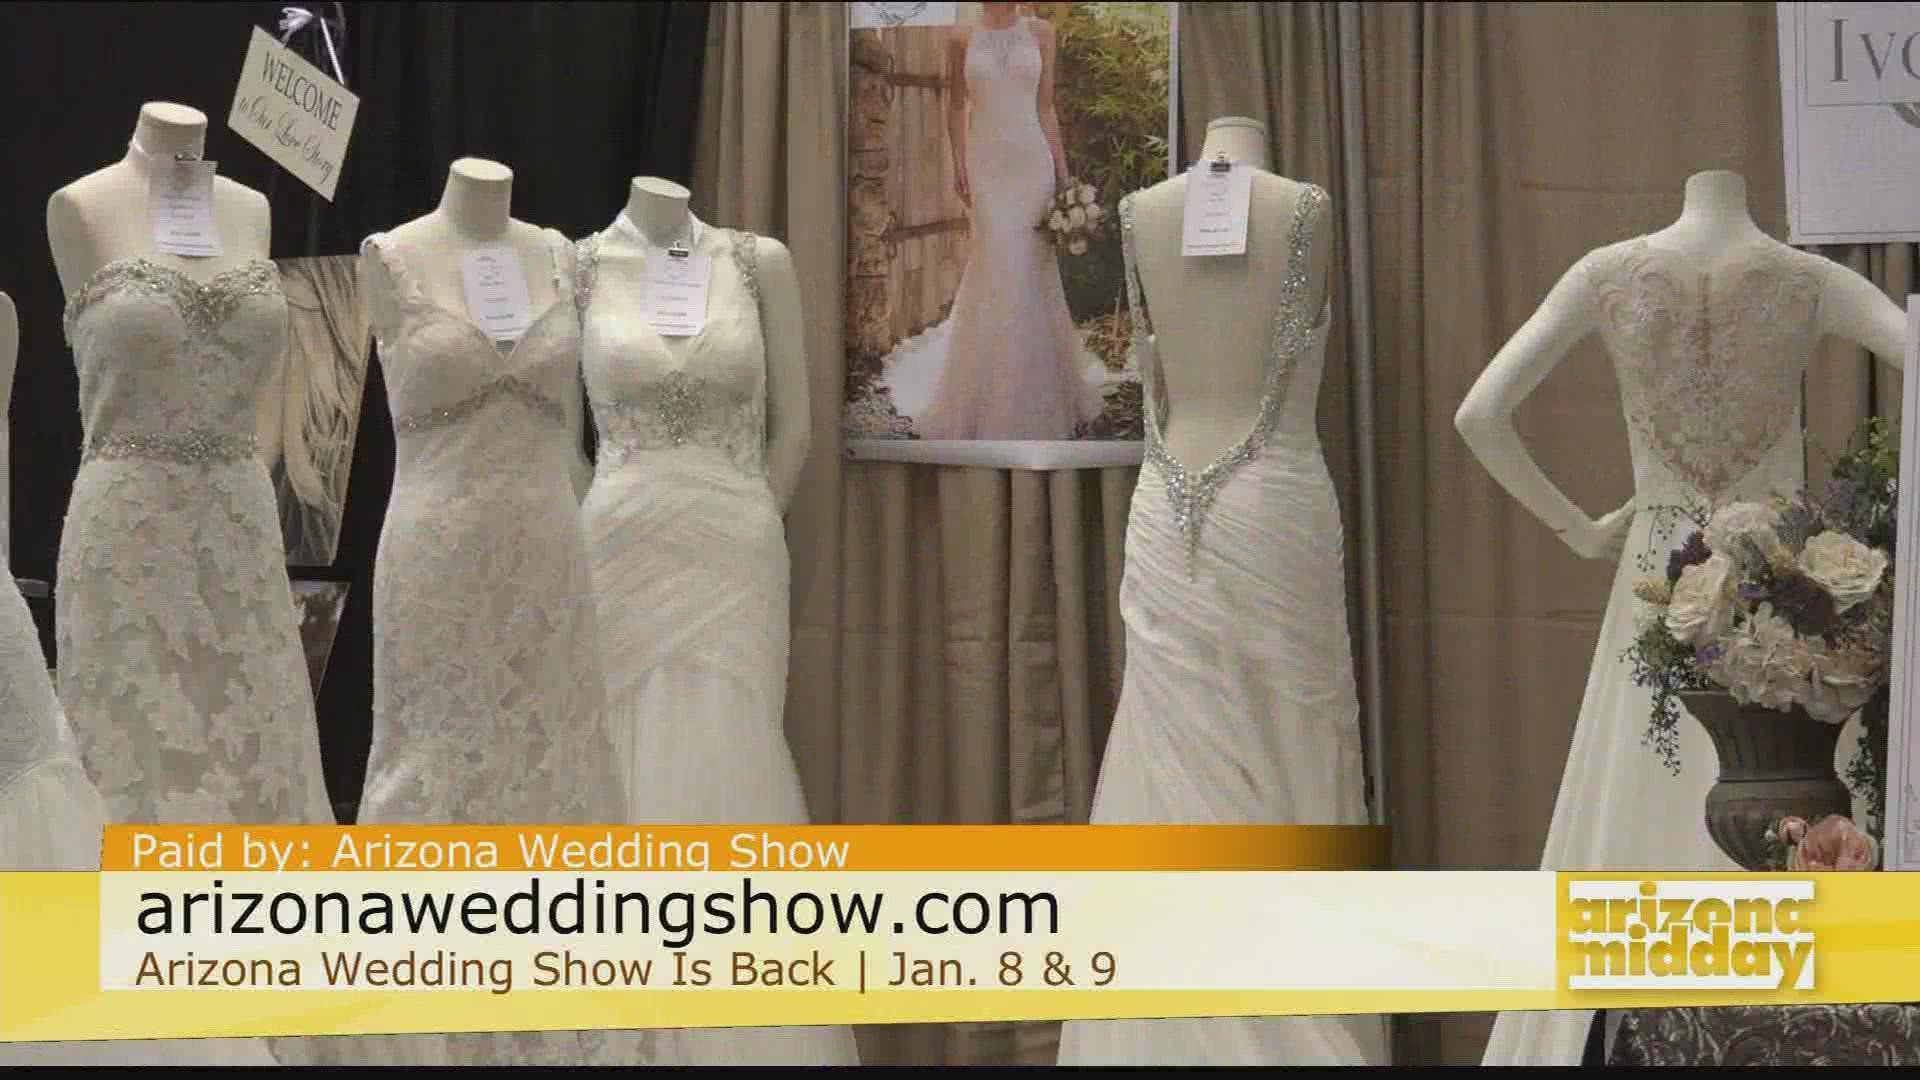 From dresses, to flowers, samples and more - Stephanie Gatzionis gives us a preview at what future brides and grooms will find at the Arizona Wedding Show.